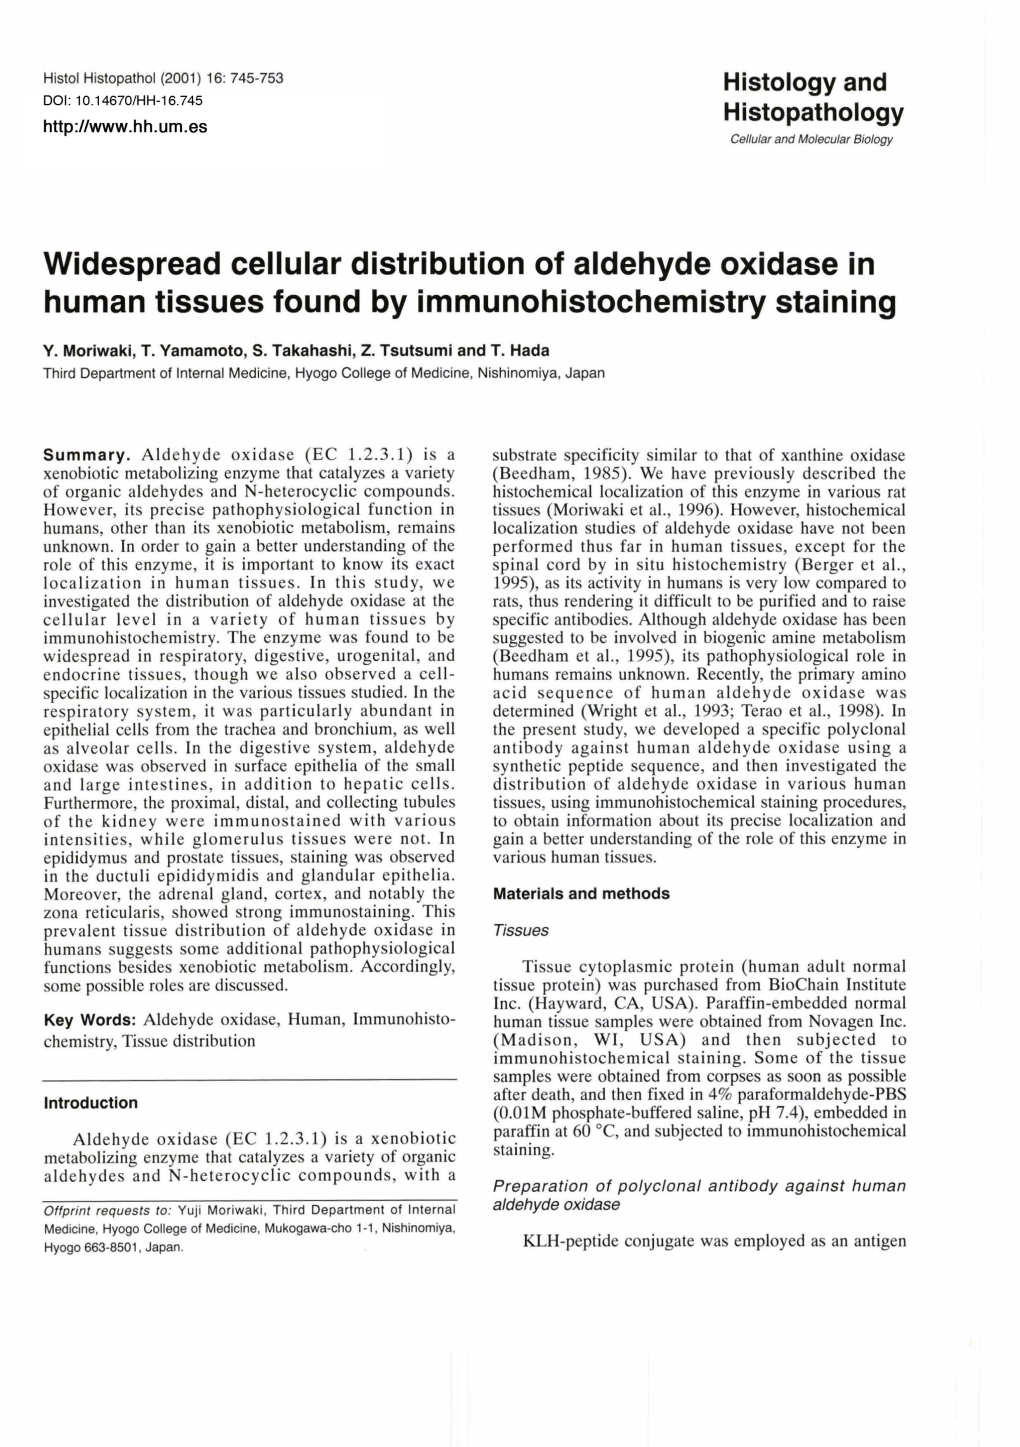 Widespread Cellular Distribution of Aldehyde Oxidase in Human Tissues Found by Immunohistochemistry Staining